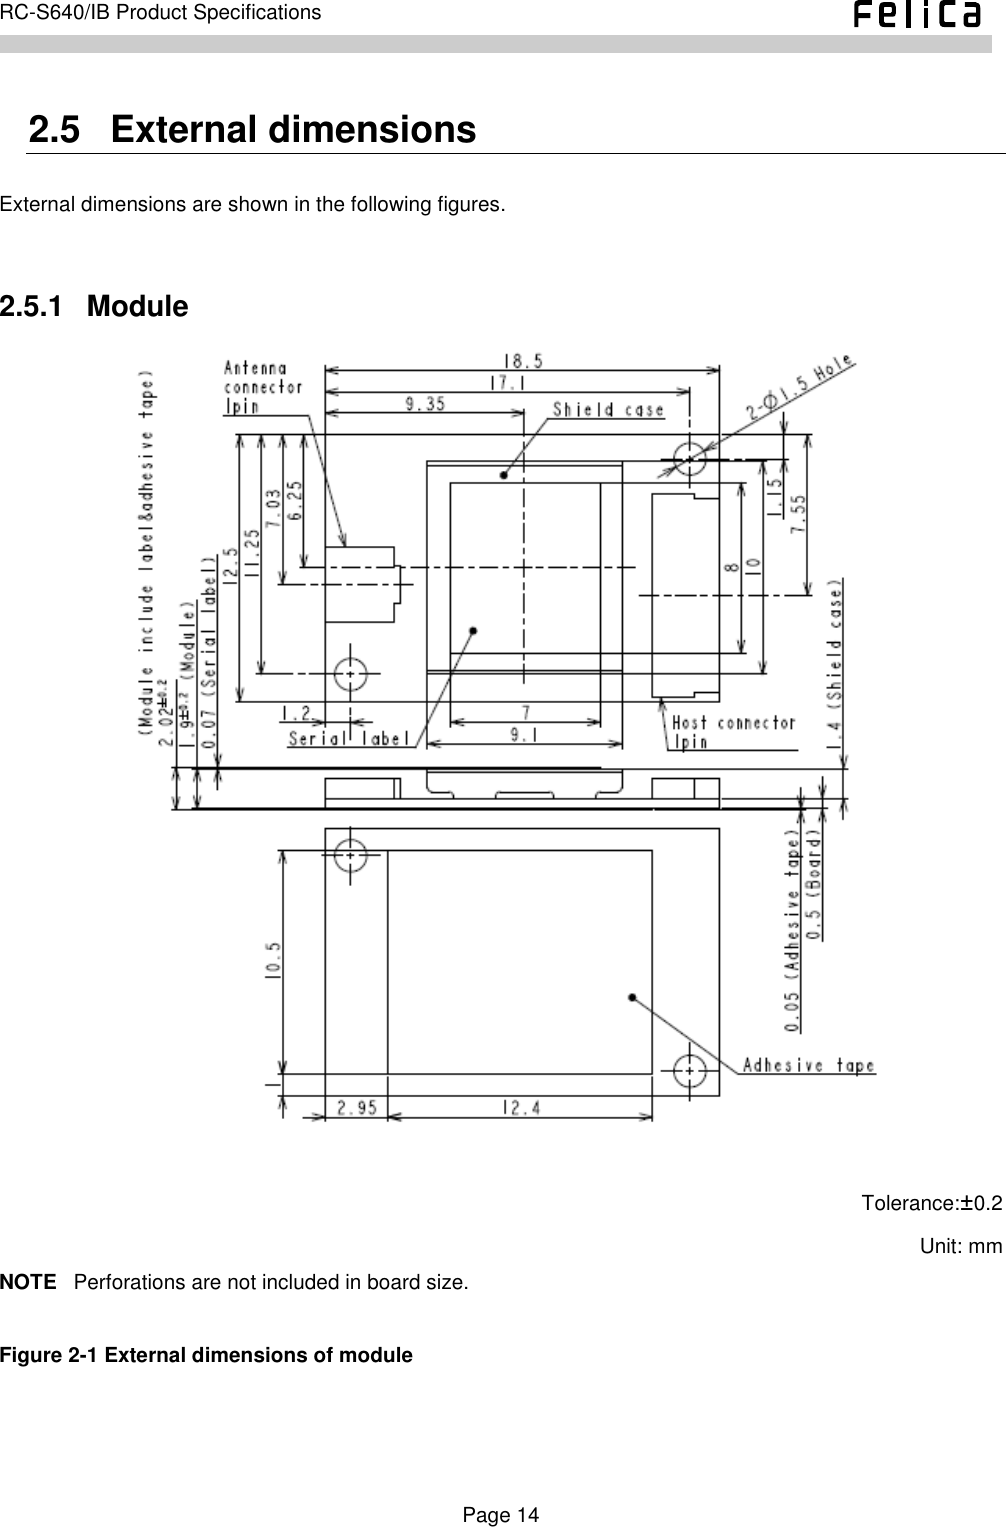    Page 14     RC-S640/IB Product Specifications    2.5   External dimensions External dimensions are shown in the following figures.  2.5.1   Module   Tolerance:±0.2 Unit: mm NOTE  Perforations are not included in board size.  Figure 2-1 External dimensions of module    